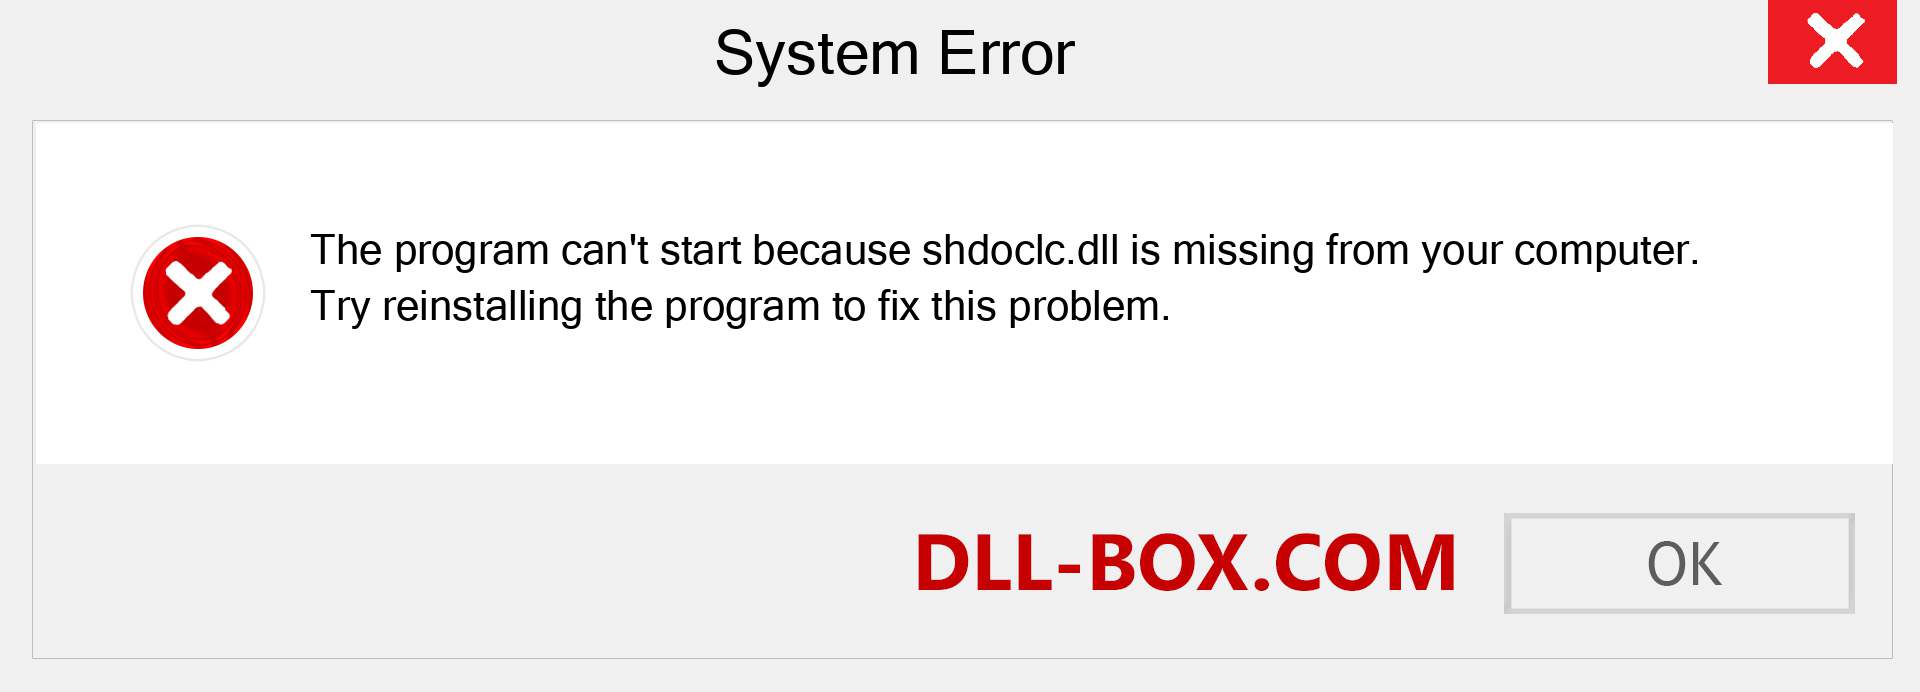  shdoclc.dll file is missing?. Download for Windows 7, 8, 10 - Fix  shdoclc dll Missing Error on Windows, photos, images